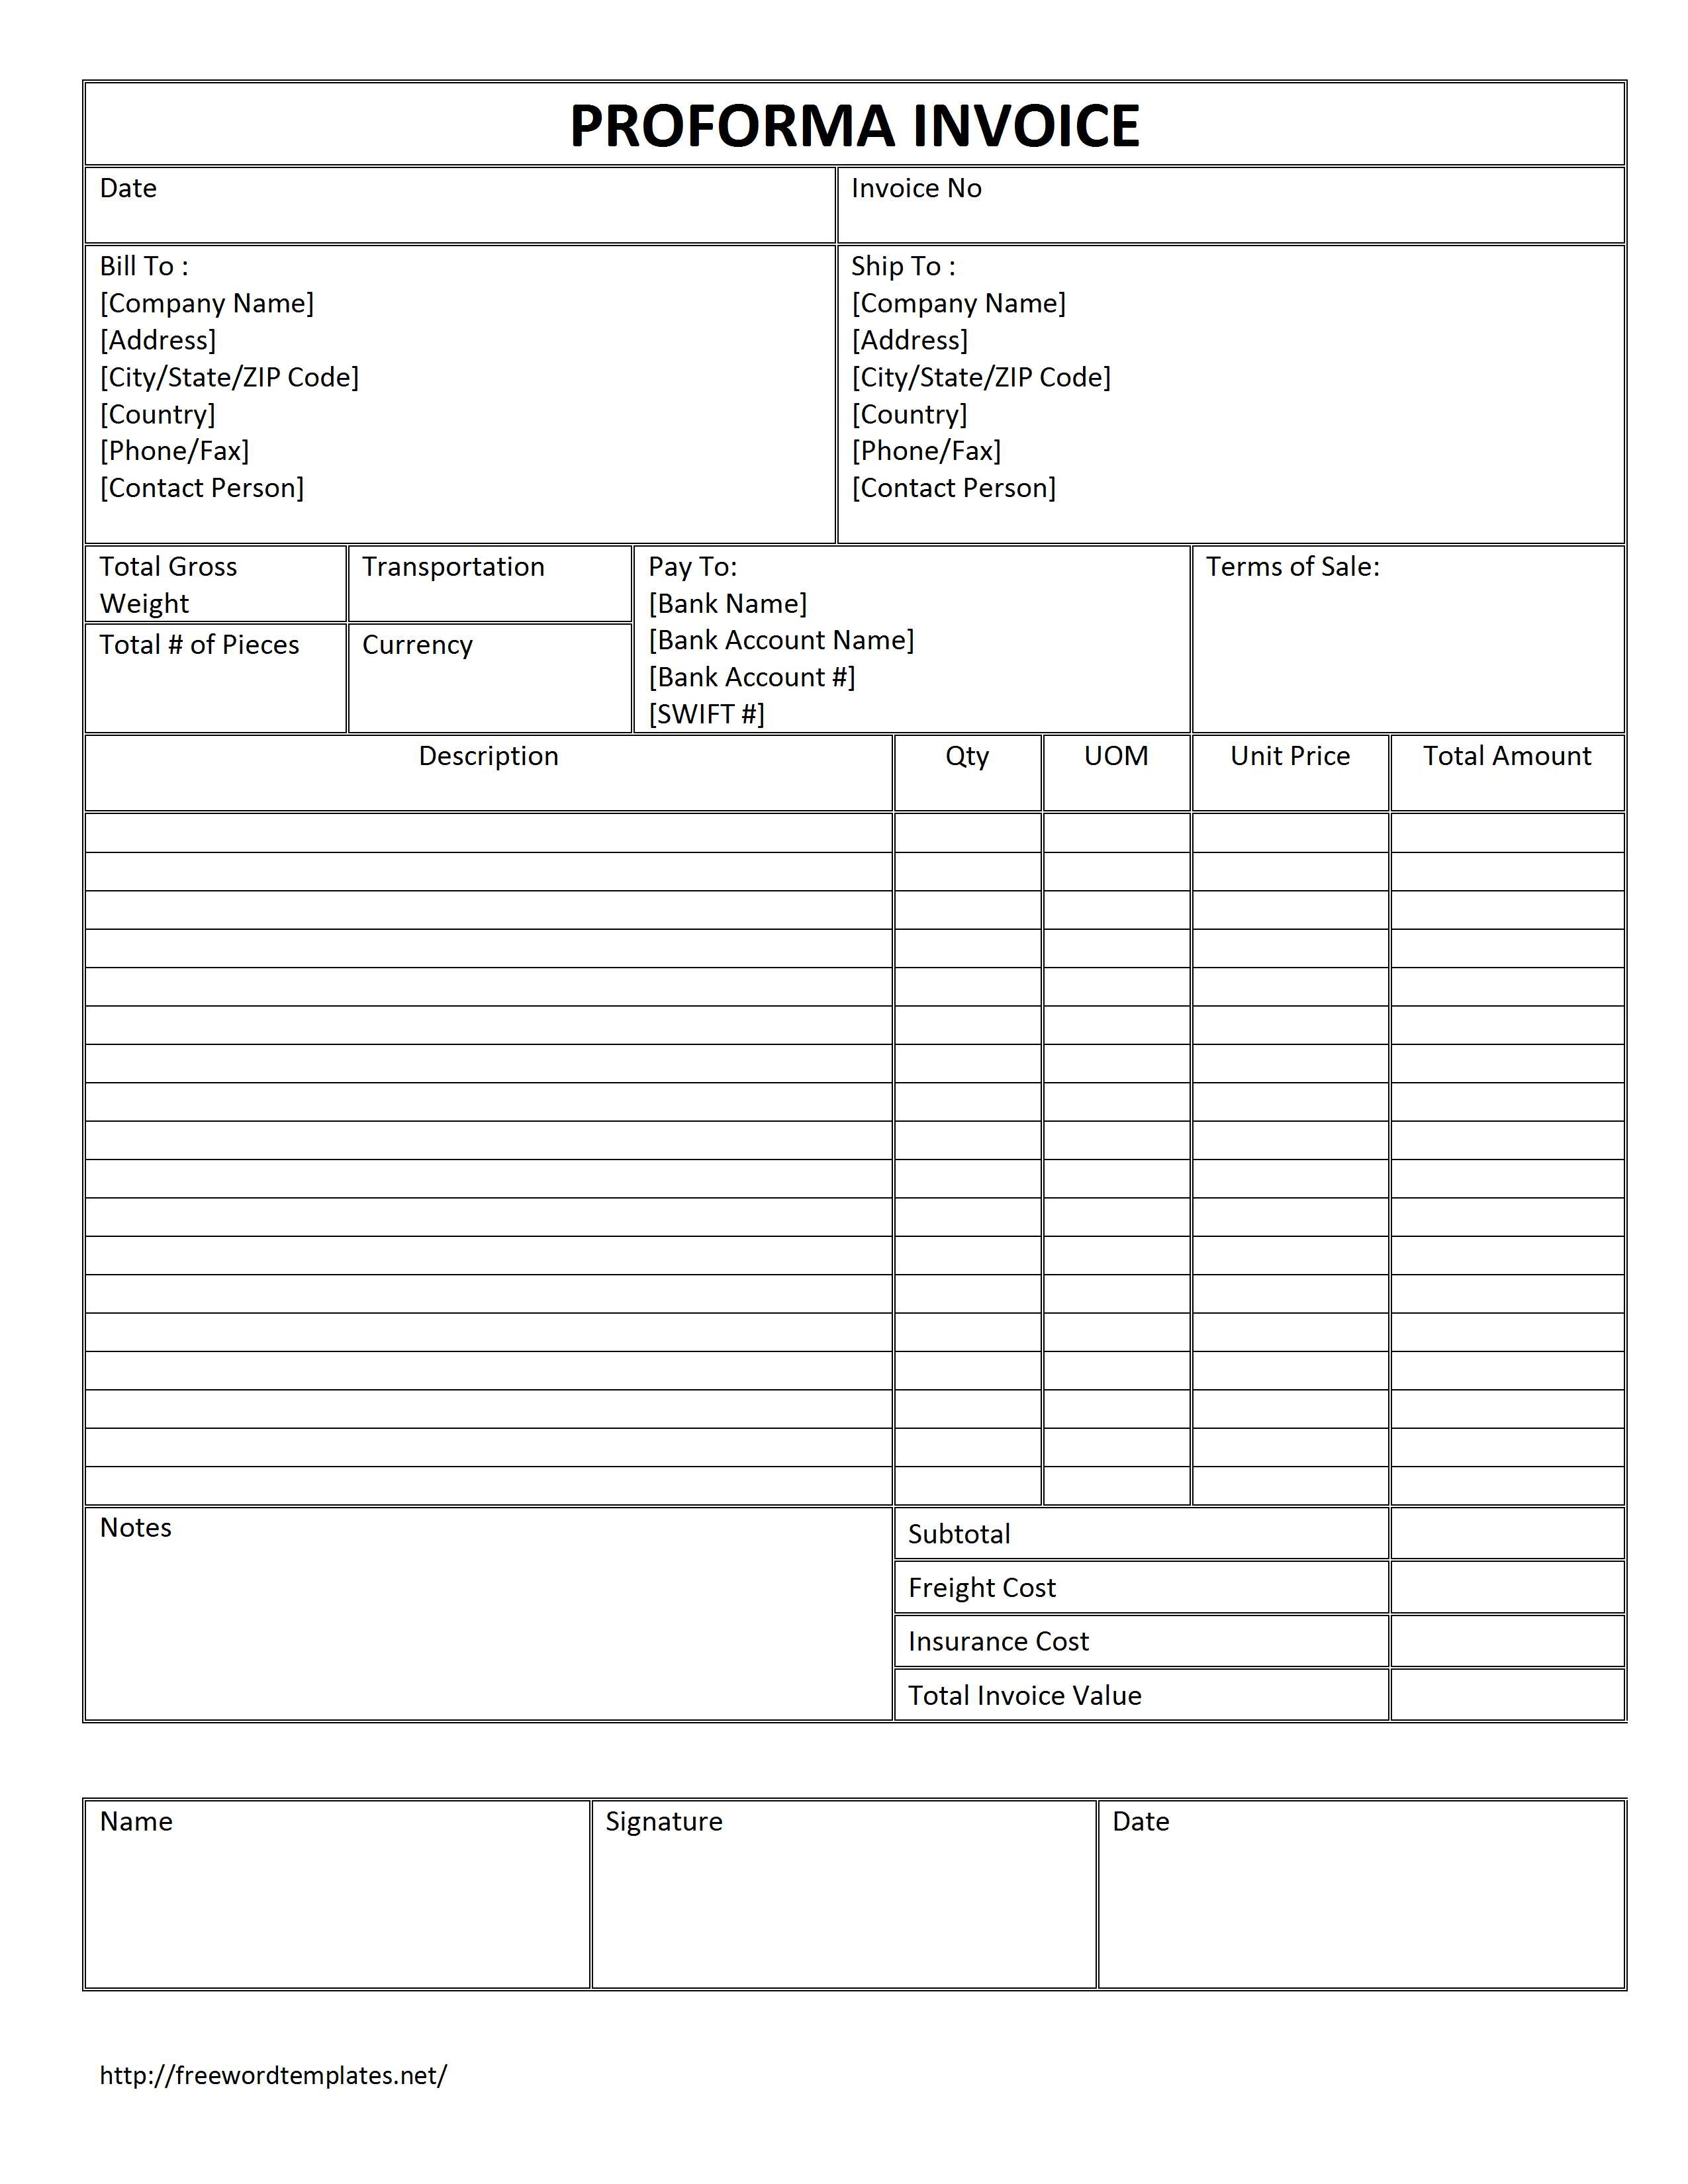 sample-of-proforma-invoice-for-export-invoice-template-ideas